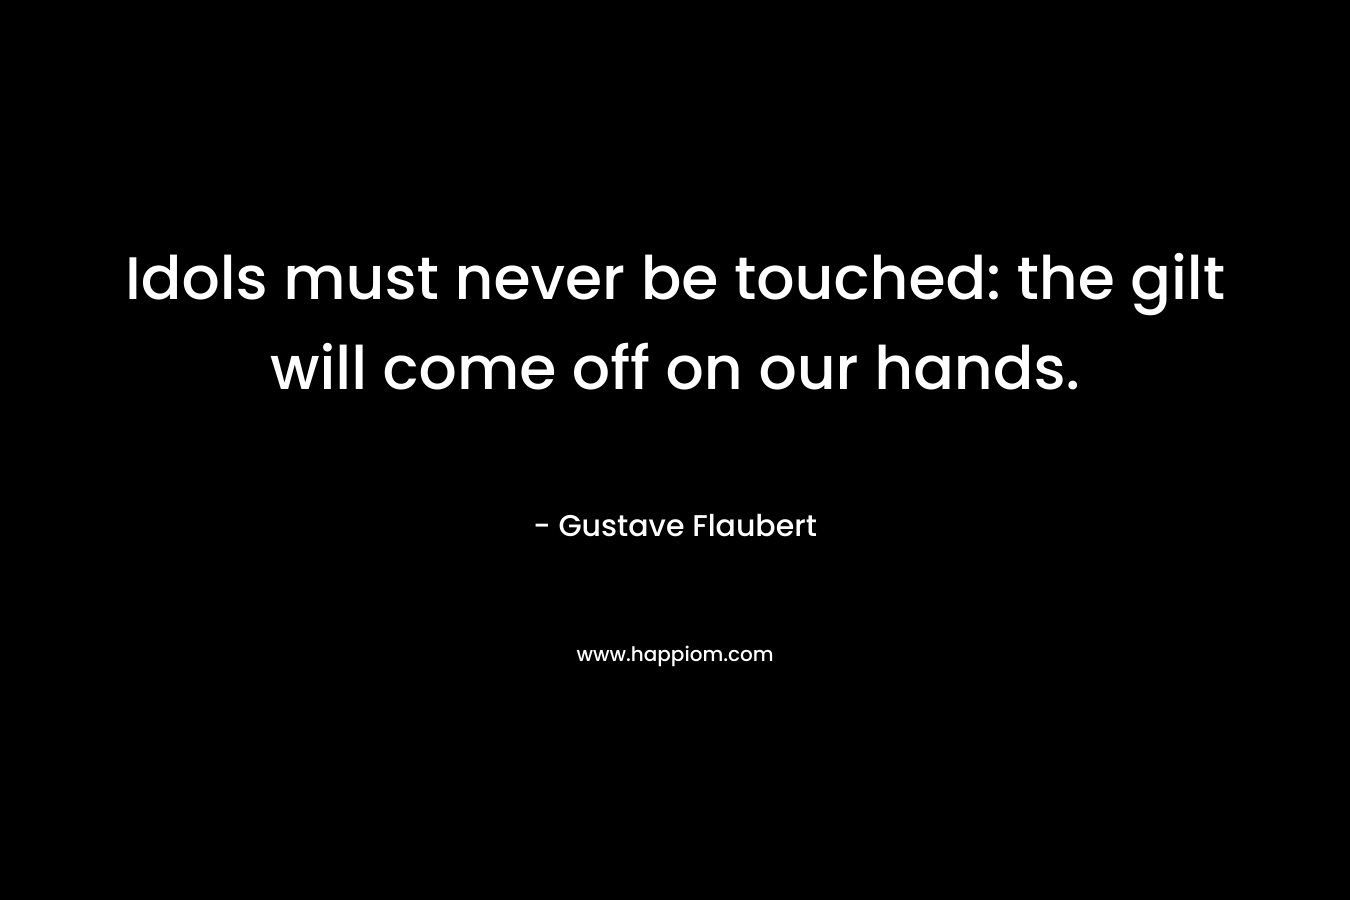 Idols must never be touched: the gilt will come off on our hands. – Gustave Flaubert